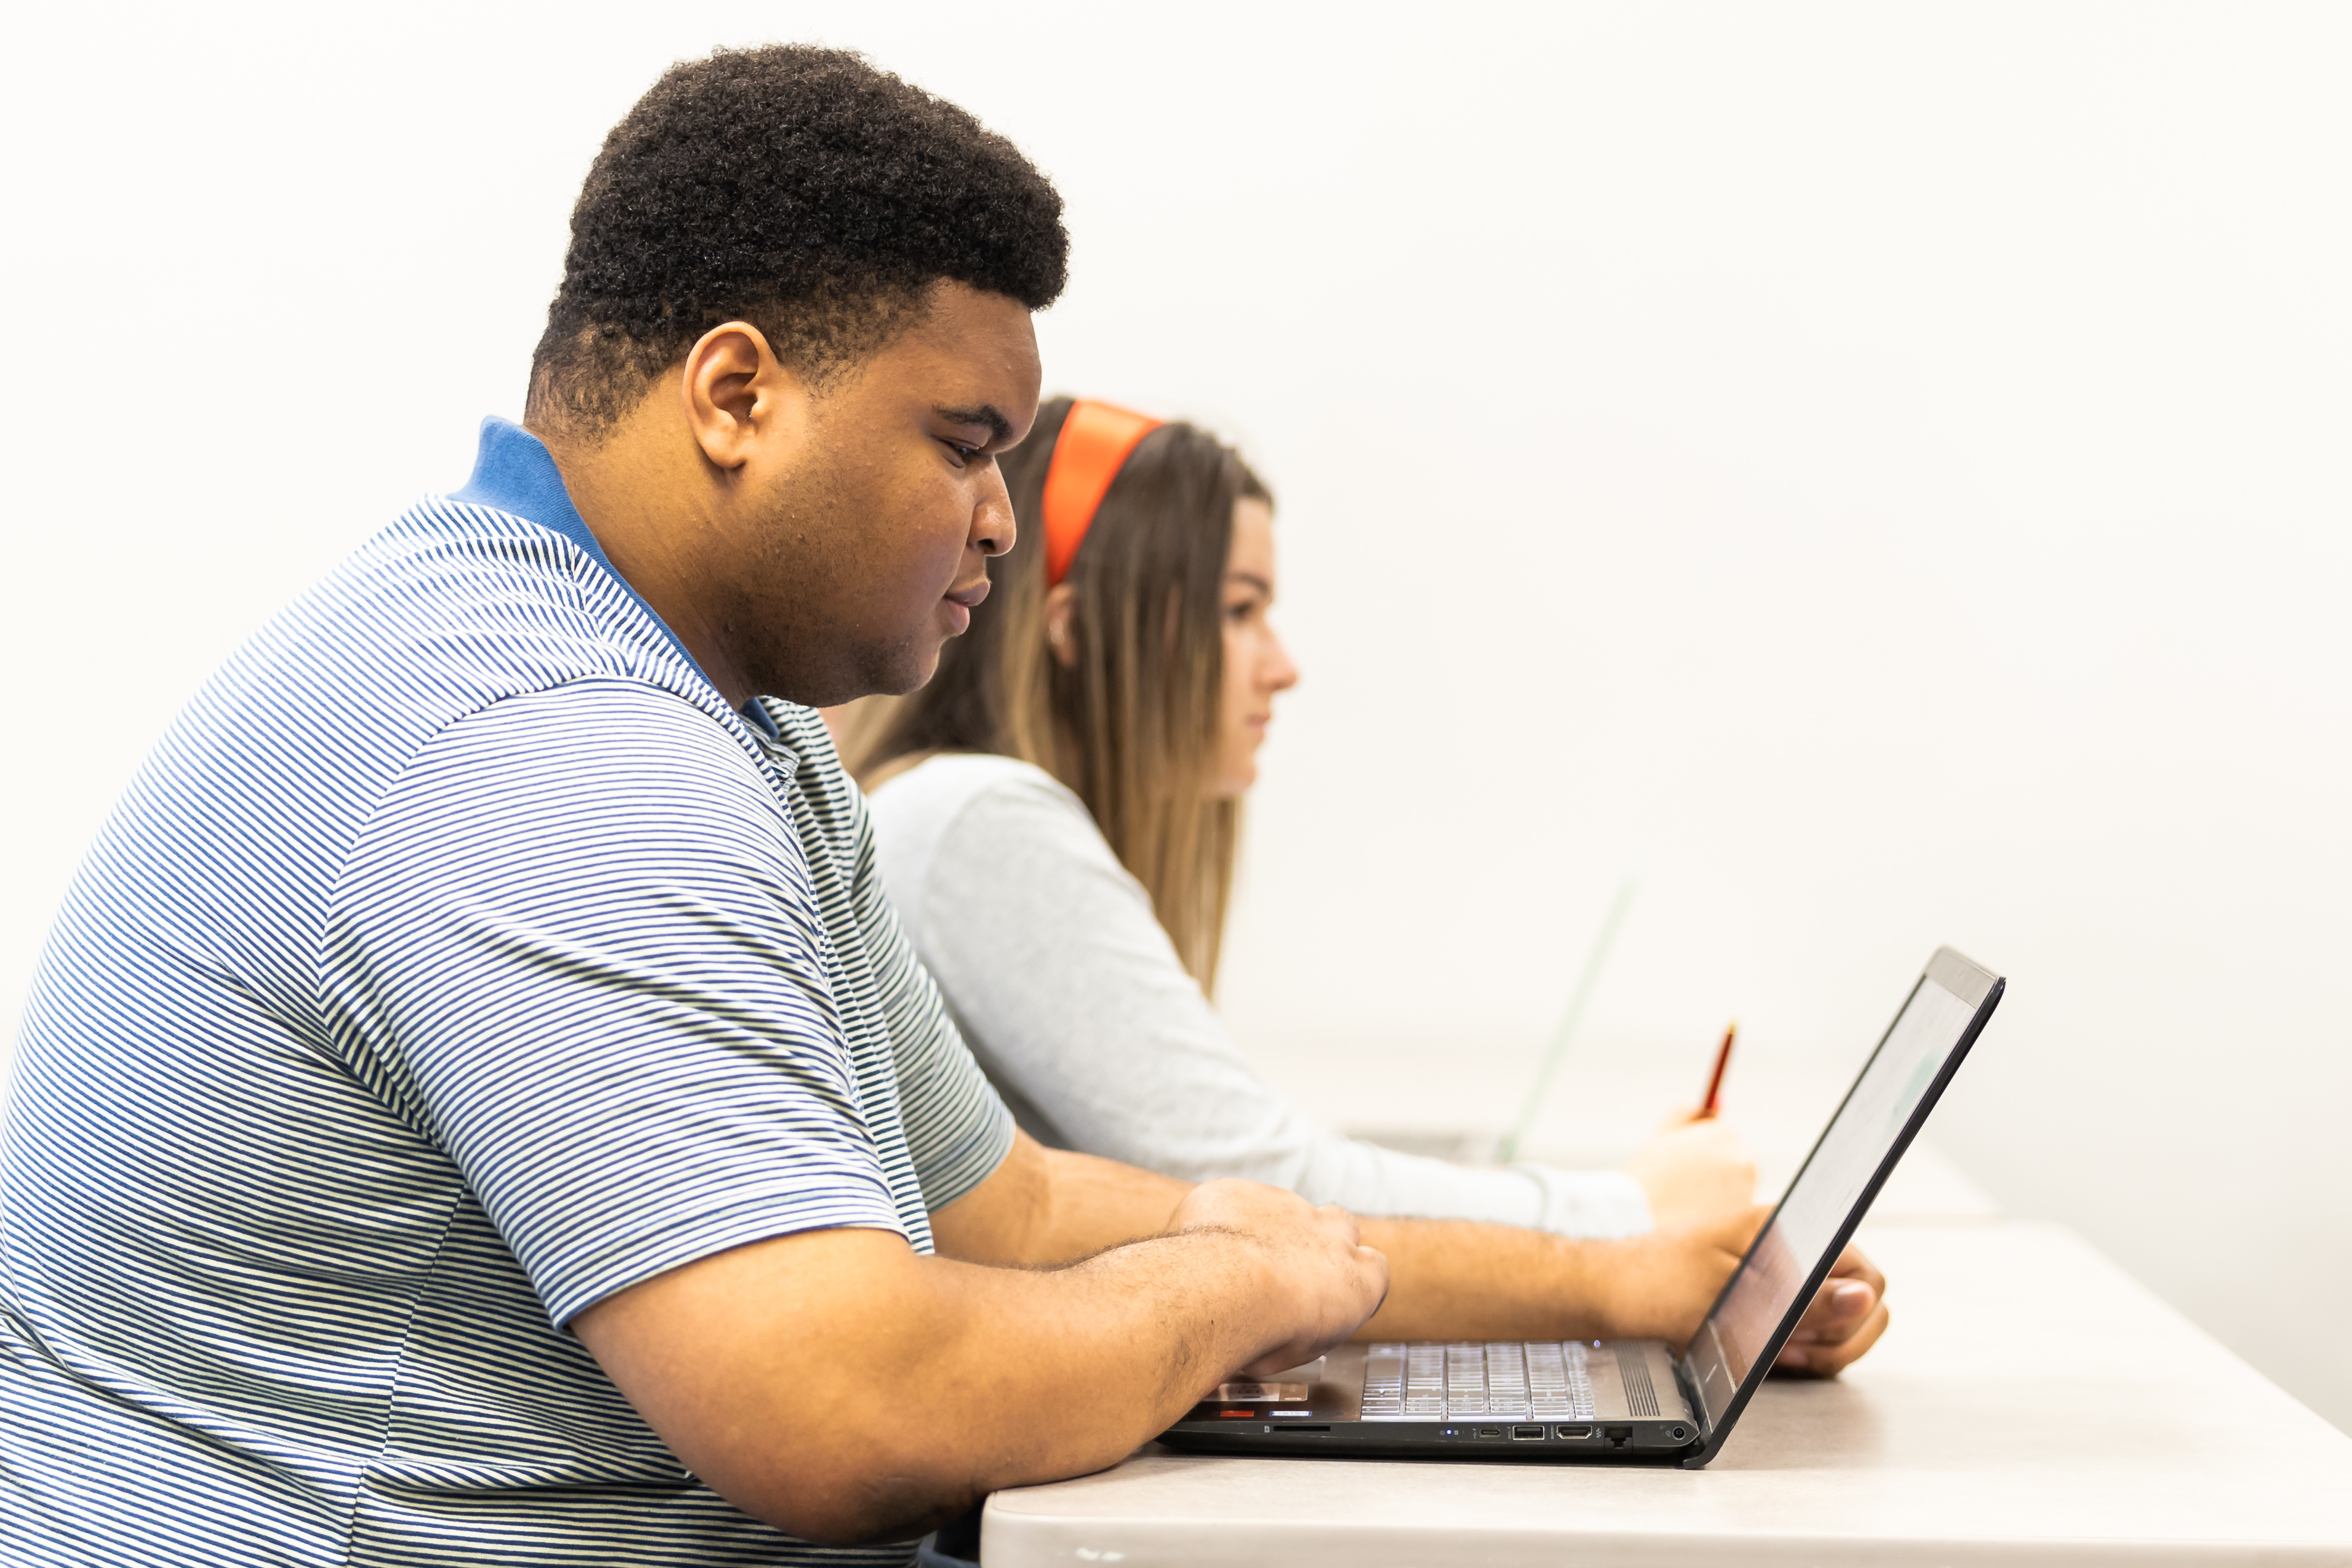 WKU student works on a laptop in class.